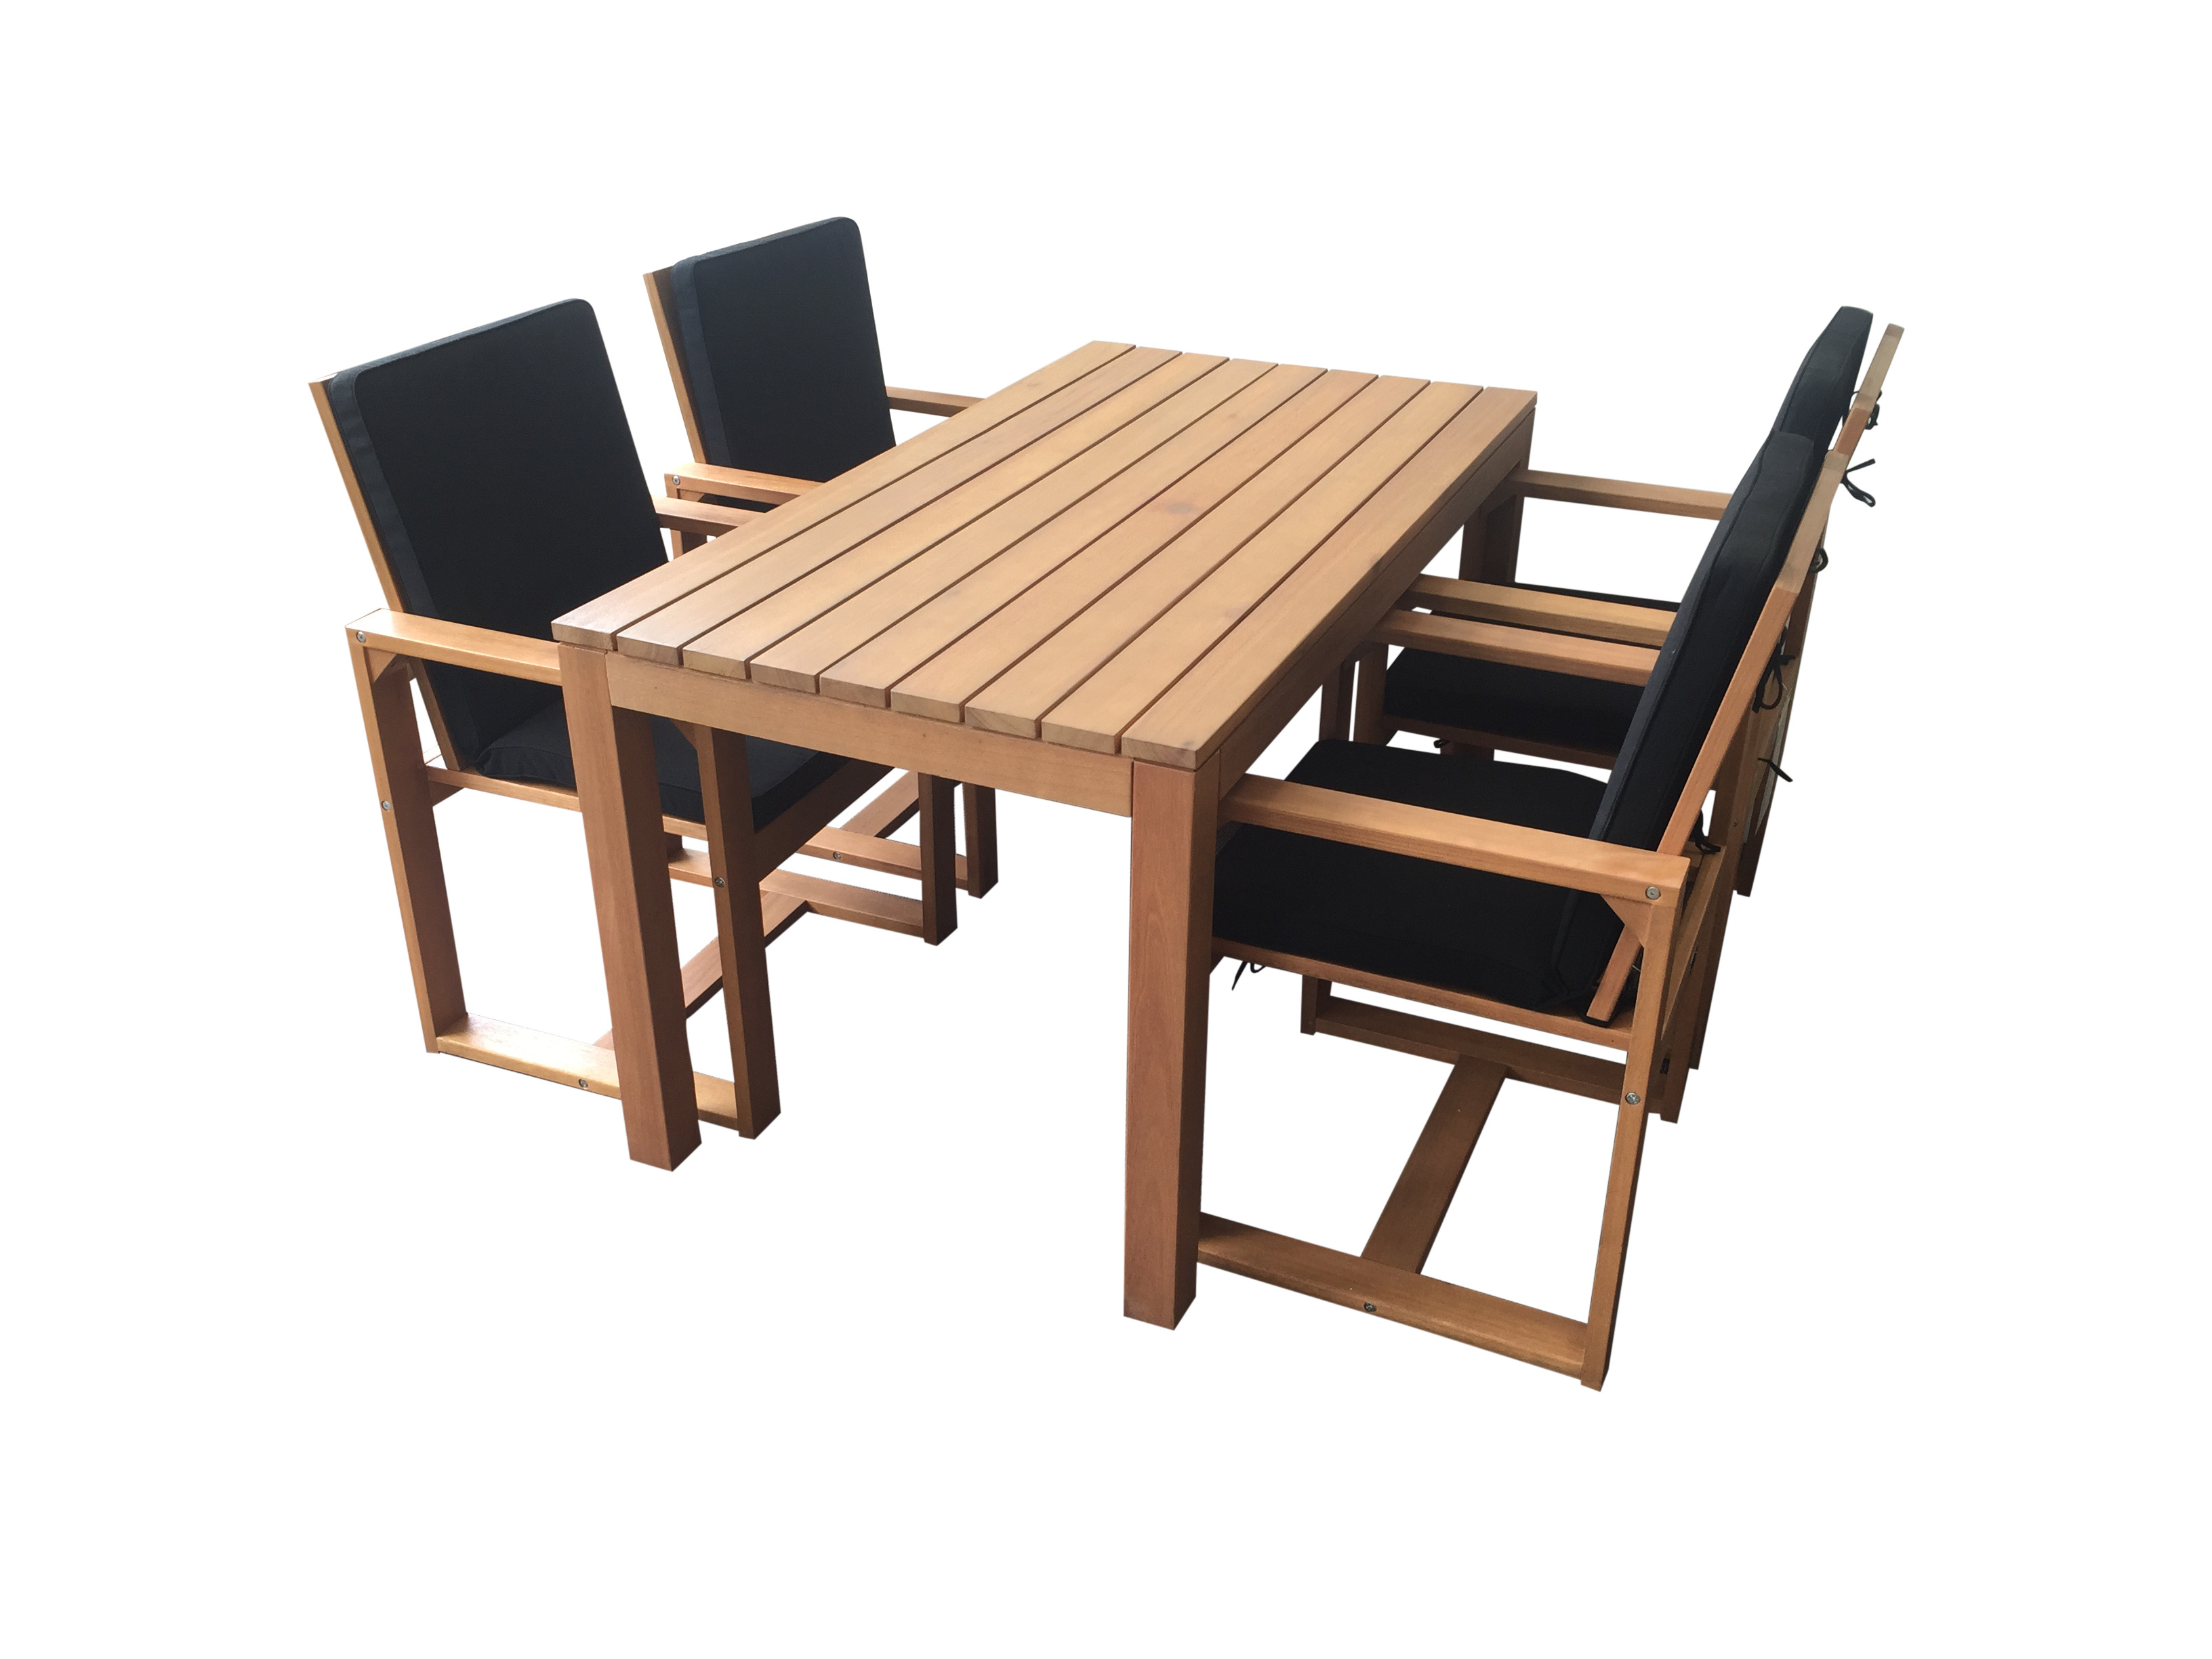 timber outdoor furniture buy the best outdoor timber furniture ... RVYTEQG